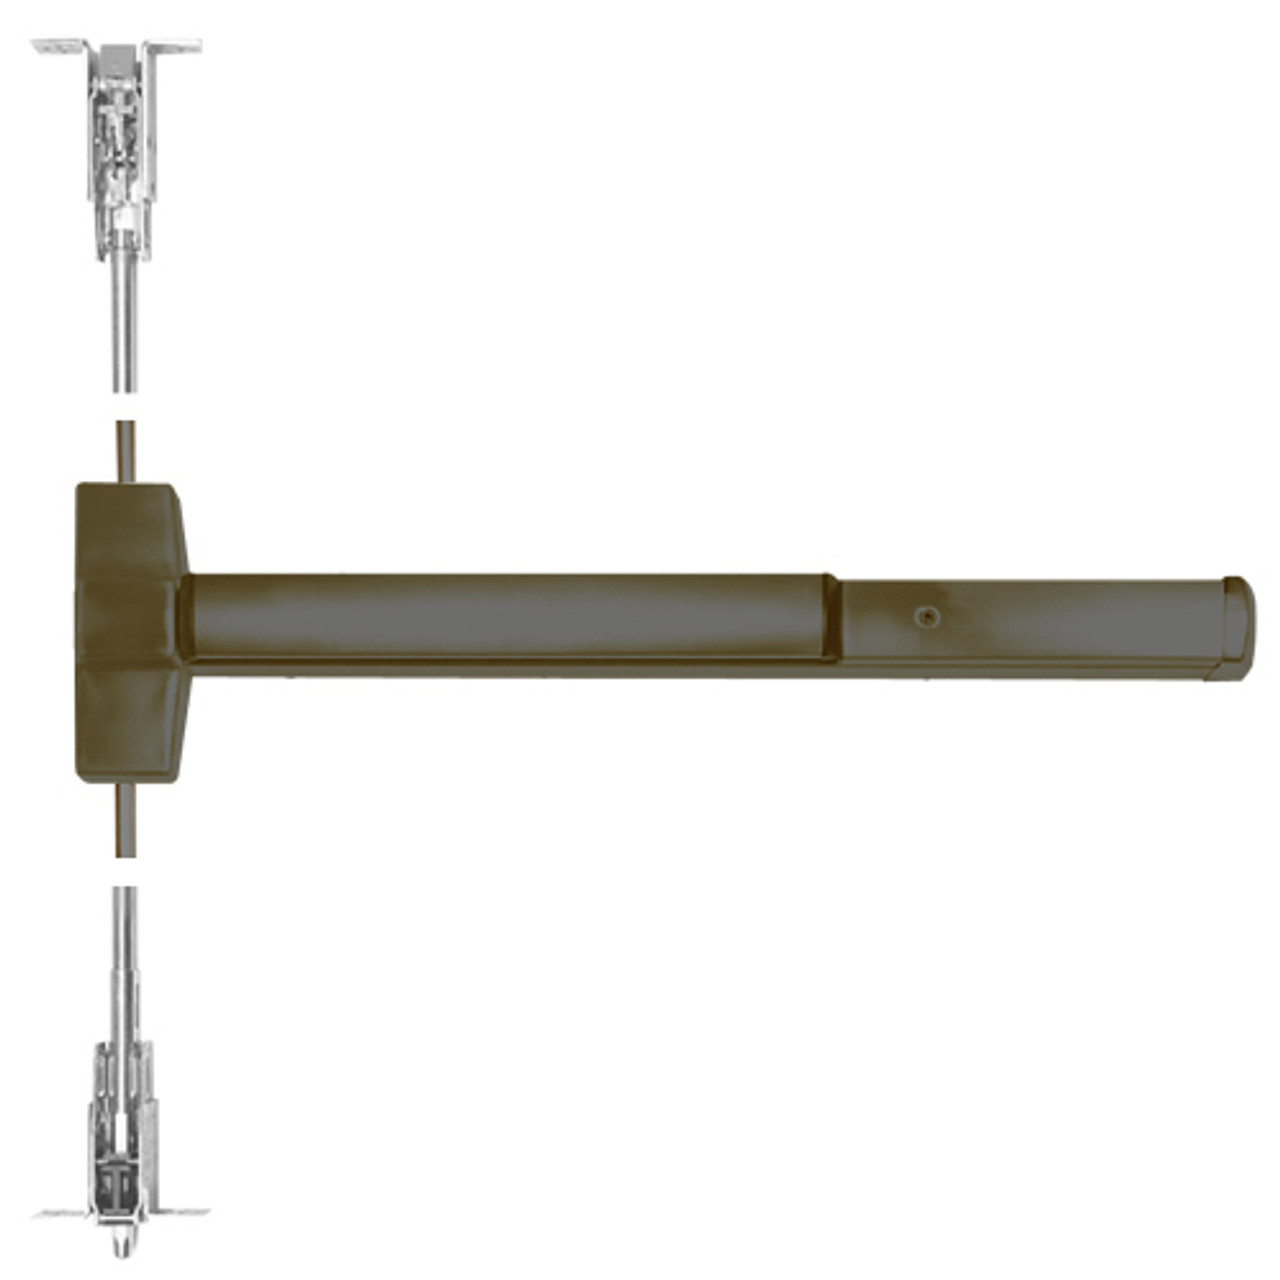 ED5800-613-W048-MELR Corbin ED5800 Series Non Fire Rated Concealed Vertical Rod Device with Motor Latch Retraction in Oil Rubbed Bronze Finish